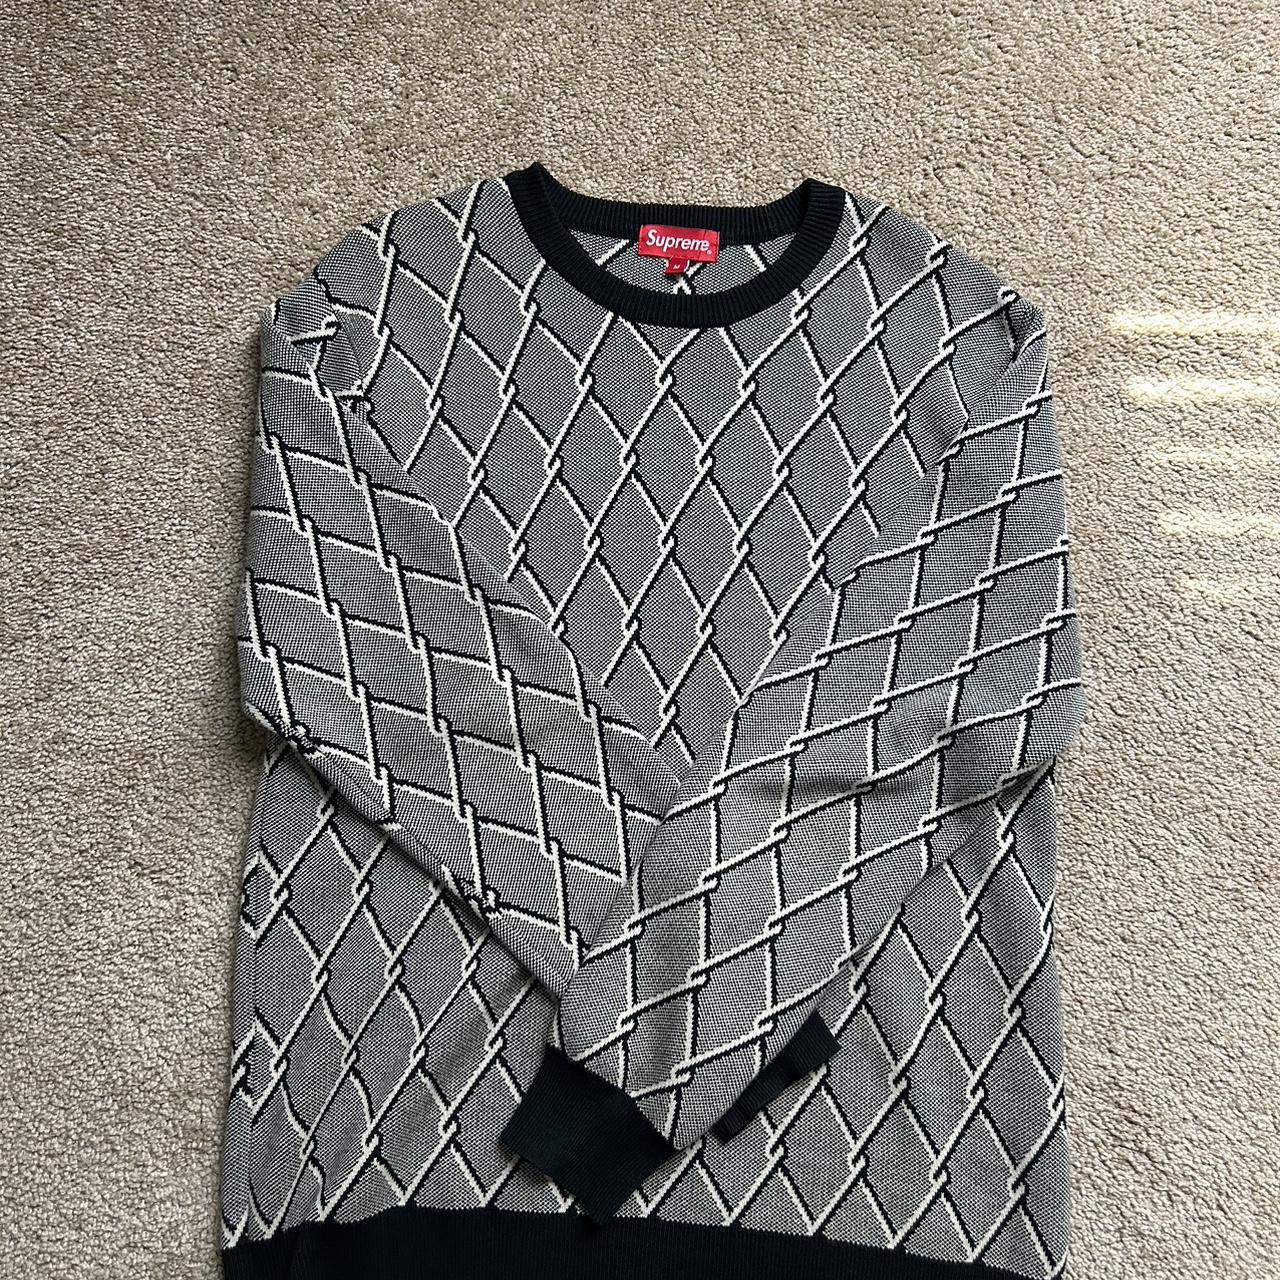 supreme chain link sweater - トップス